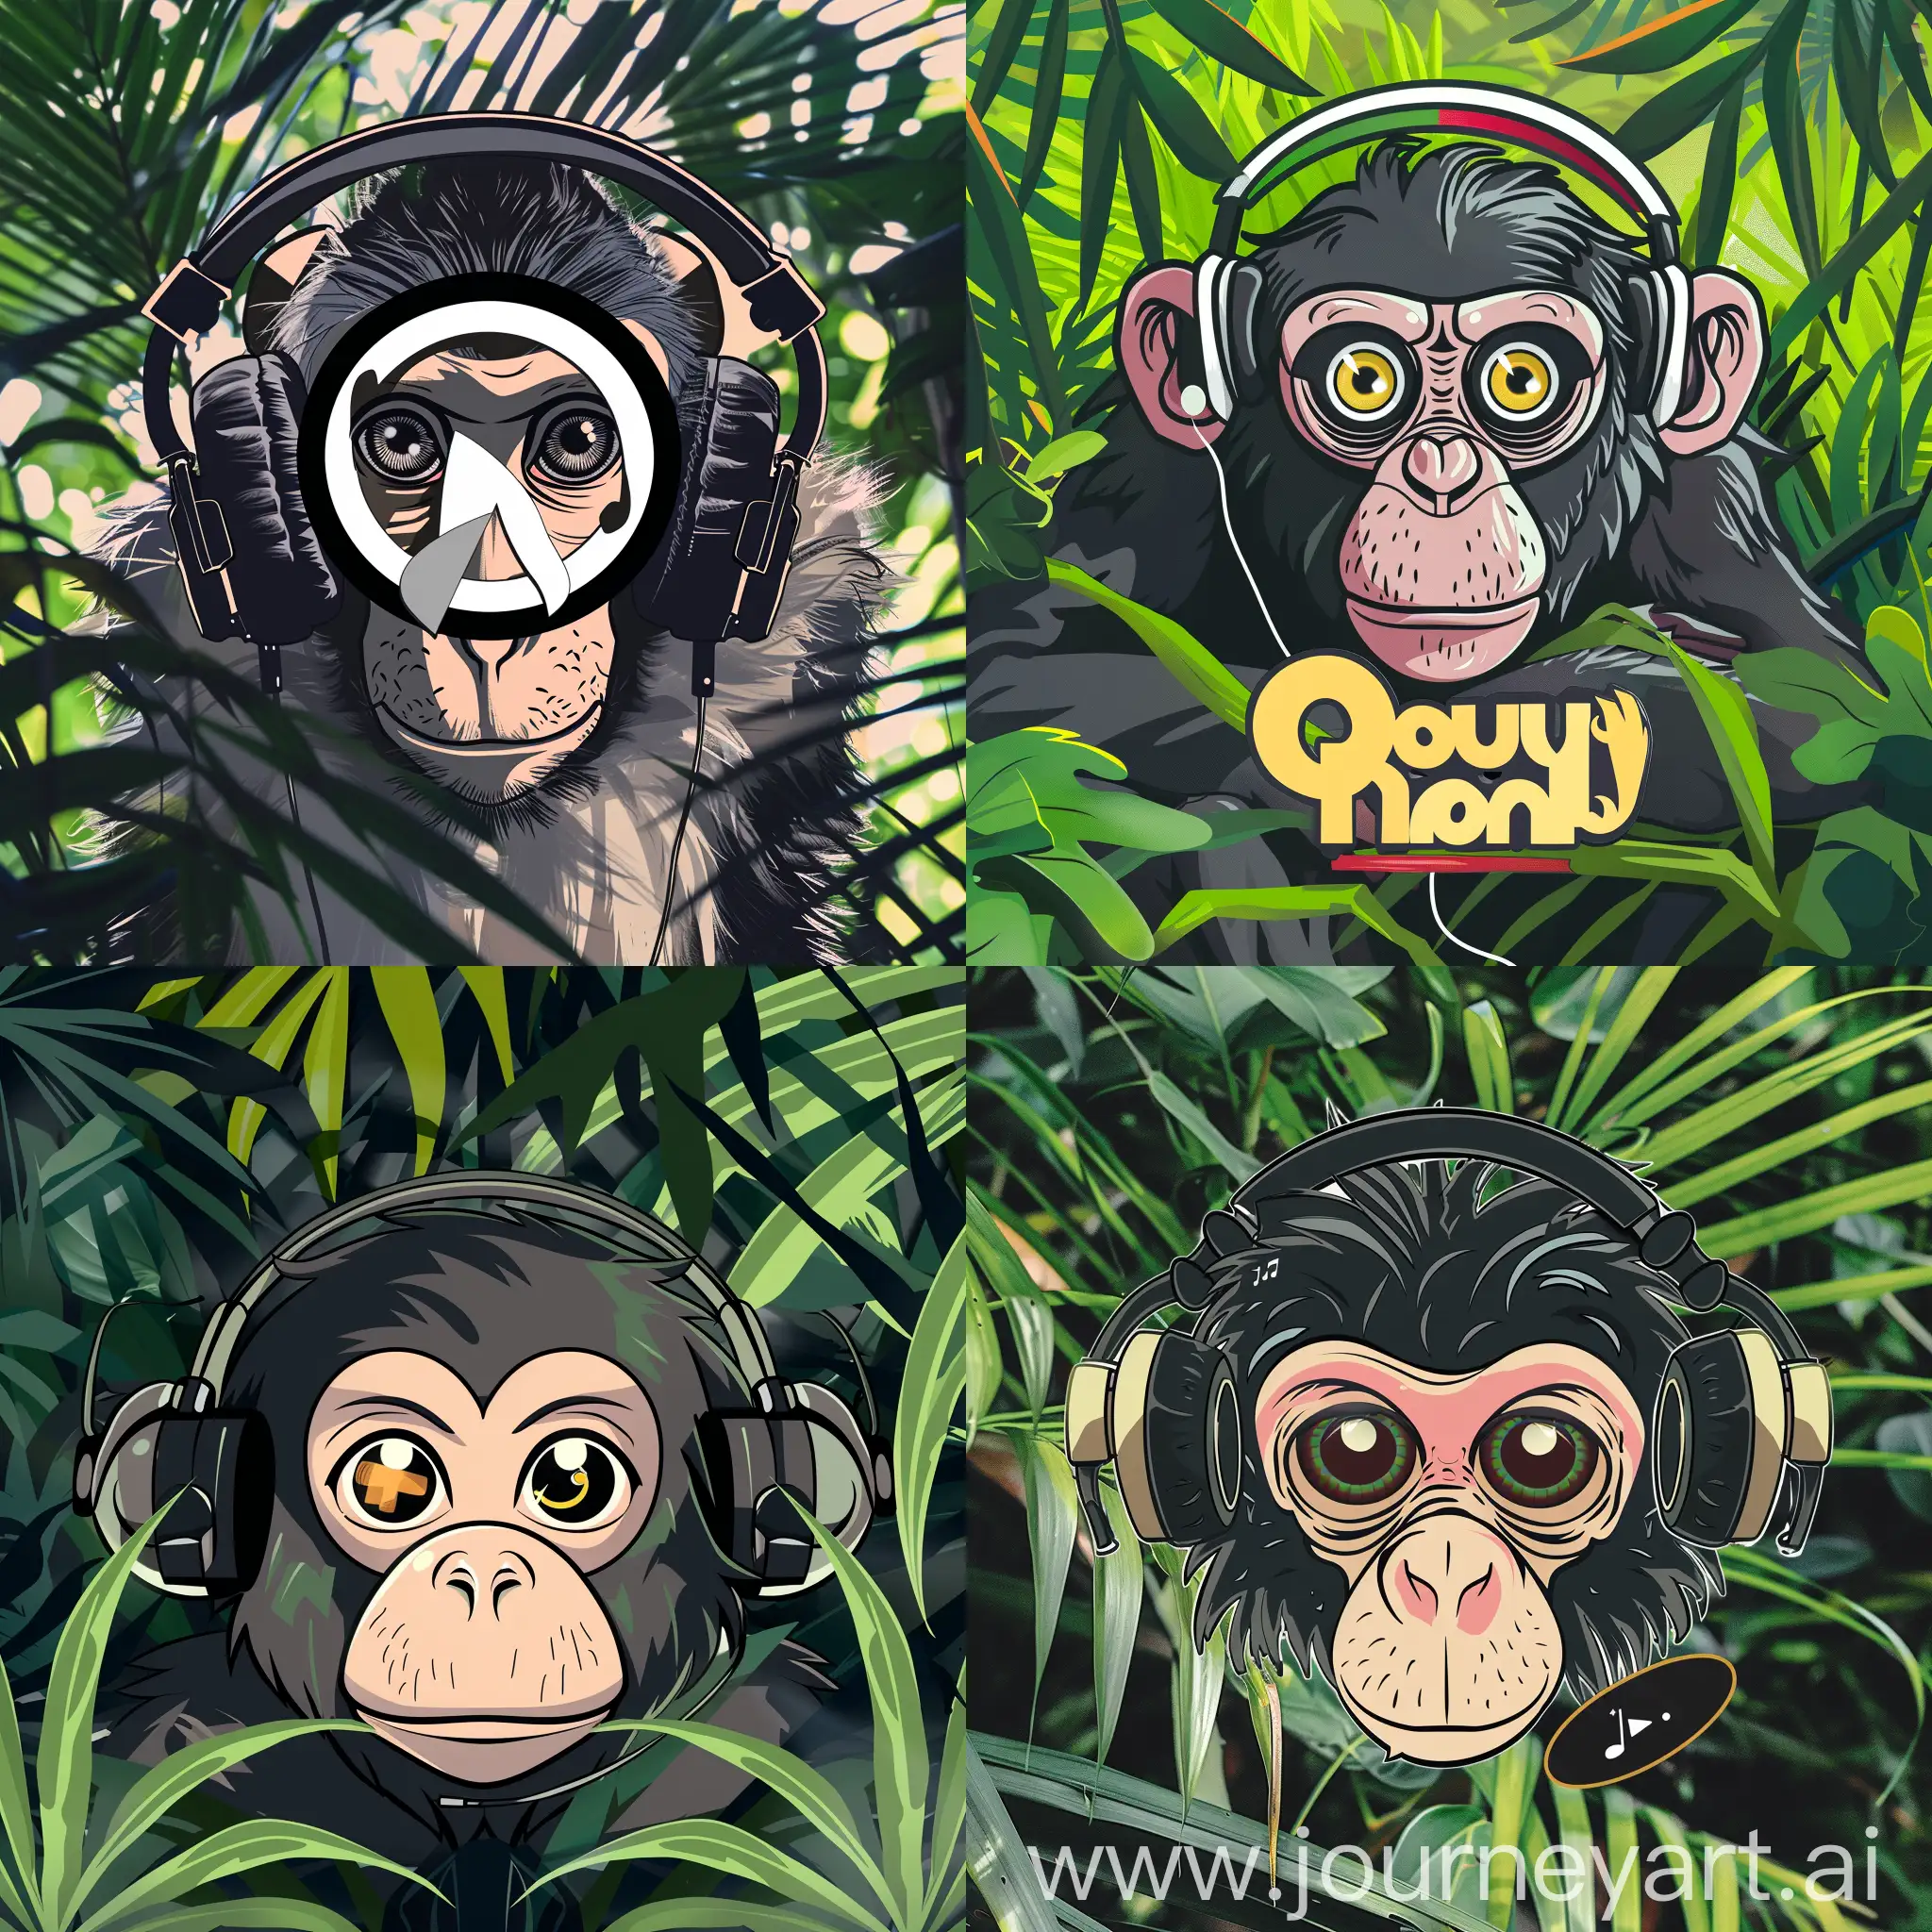 Ai created youtube music channel and a monkey listening a music with headphones in jungle and drawed like logo monkey eyes looking at camera